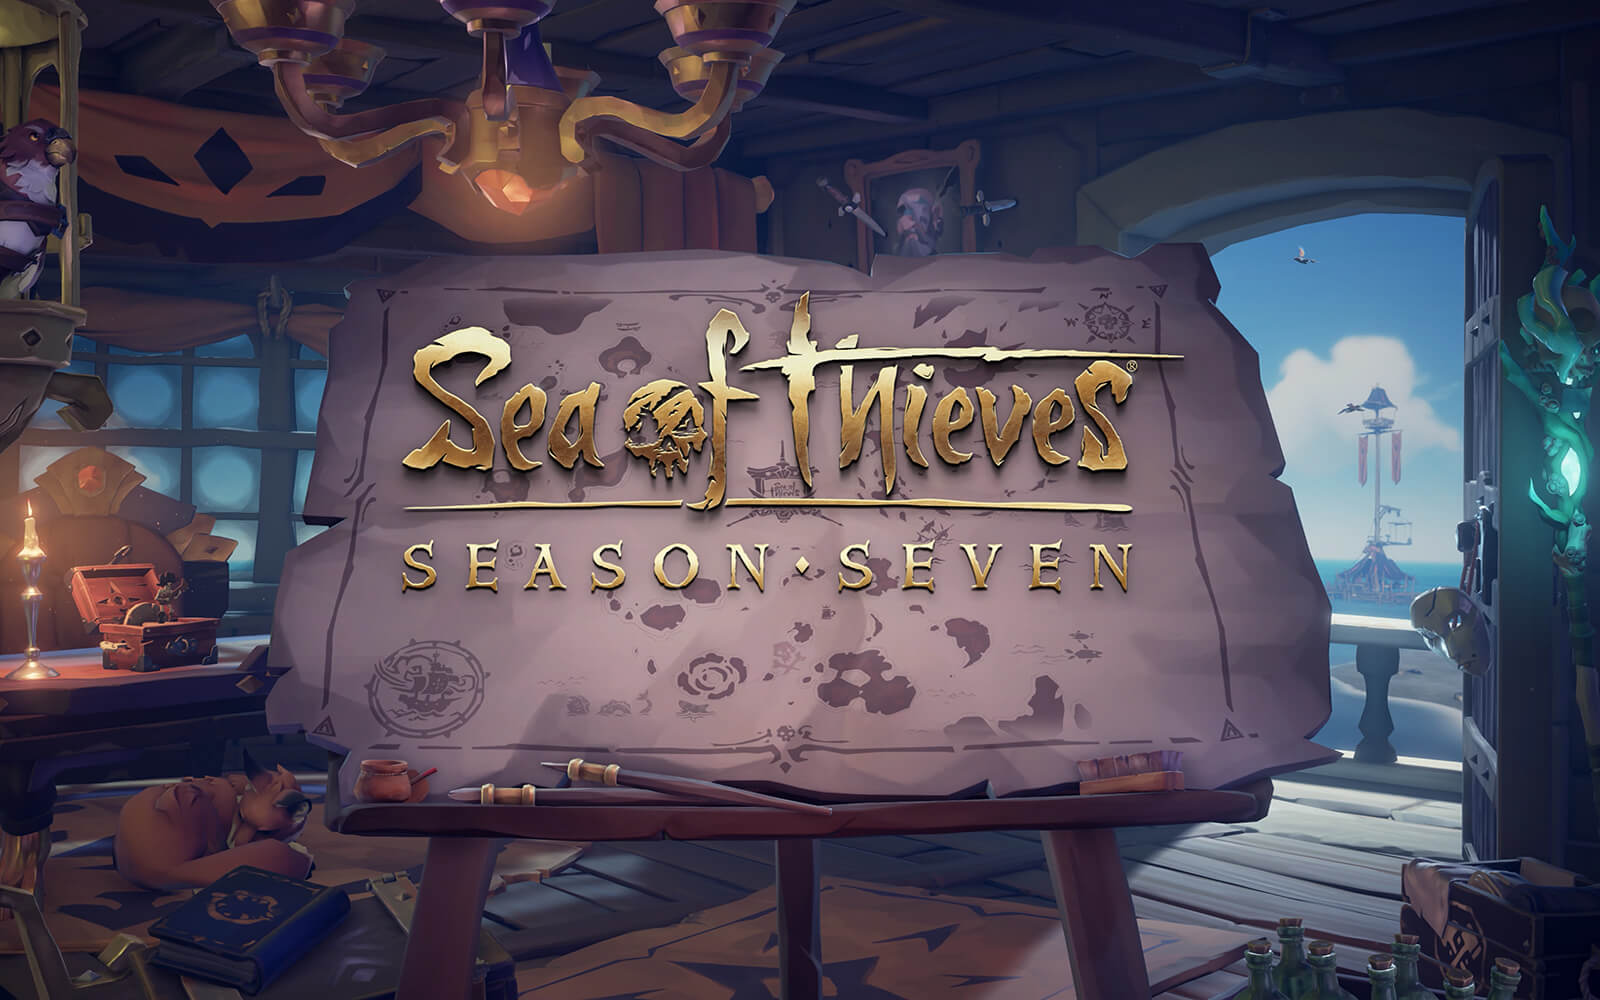 A large map with "Sea of Thieves Season Seven" written on it